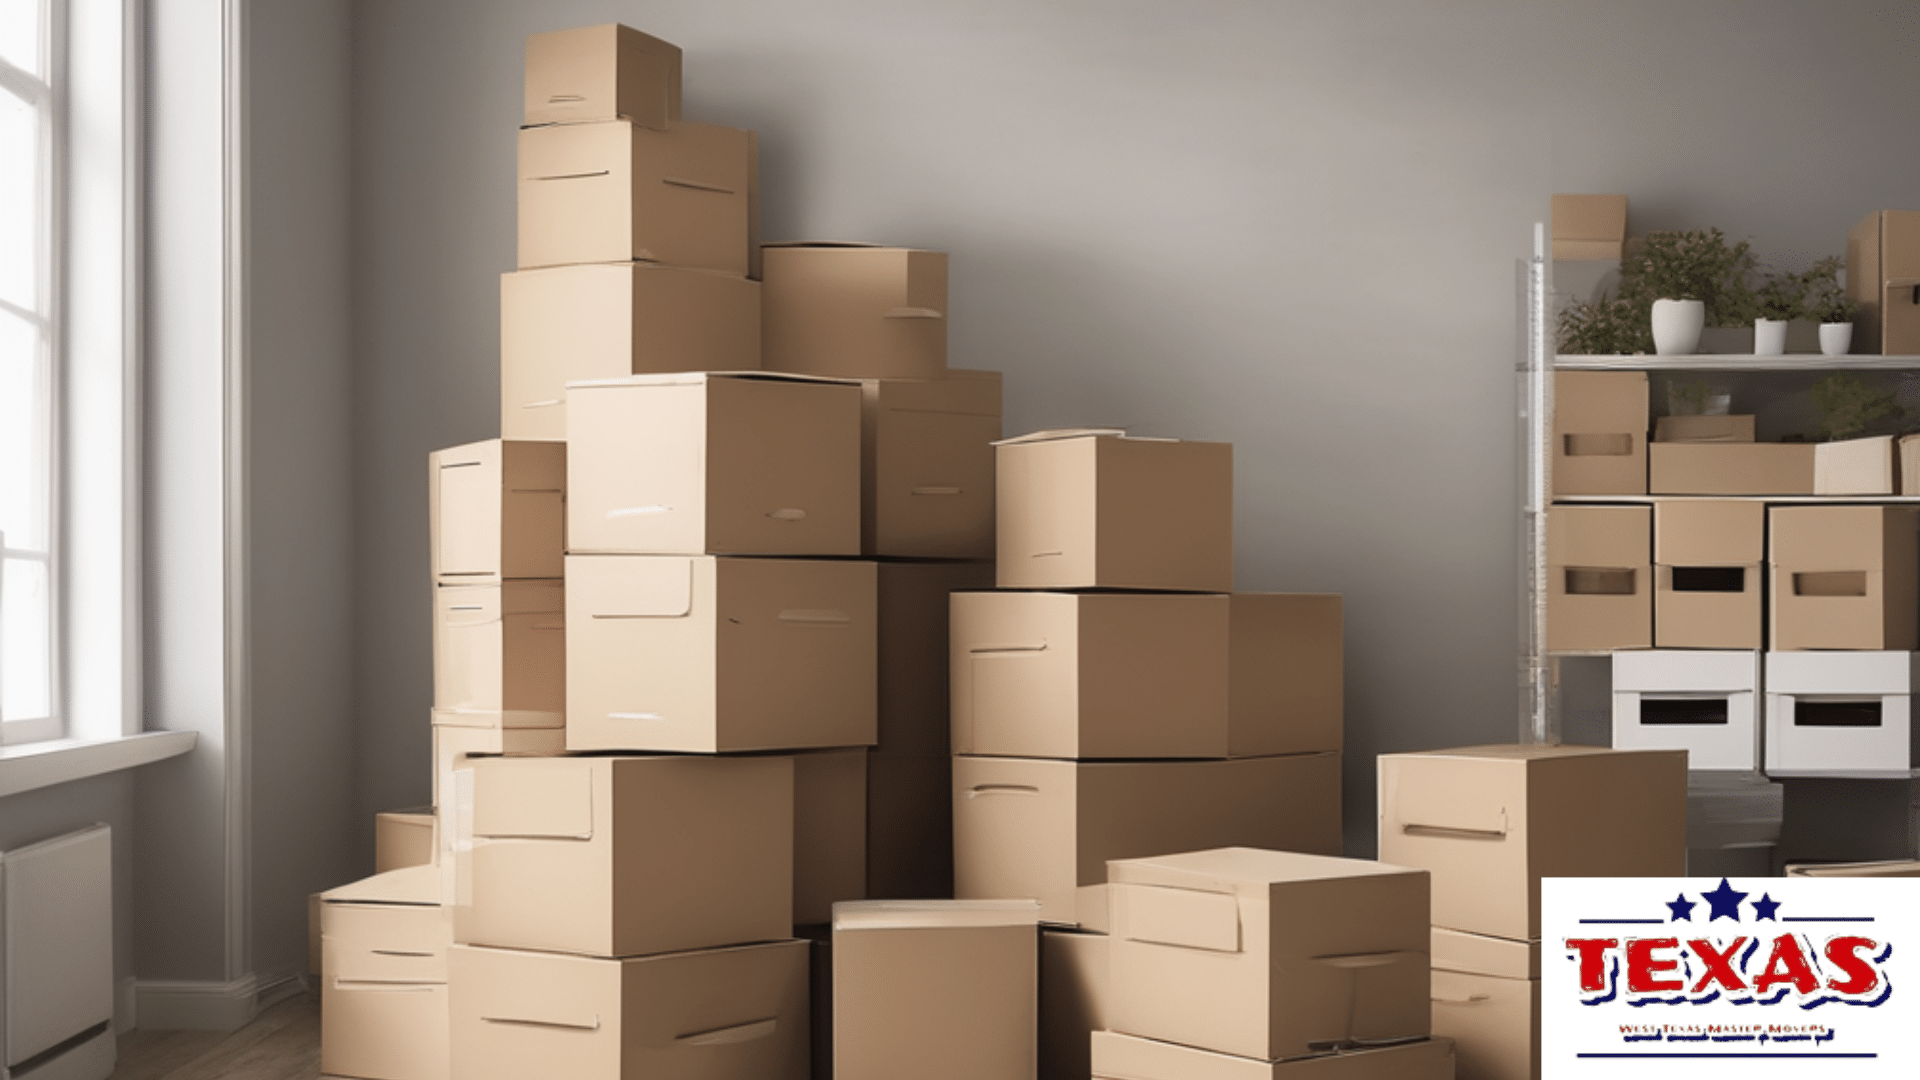 Packing and Moving Companies in Midland-Odessa Texas